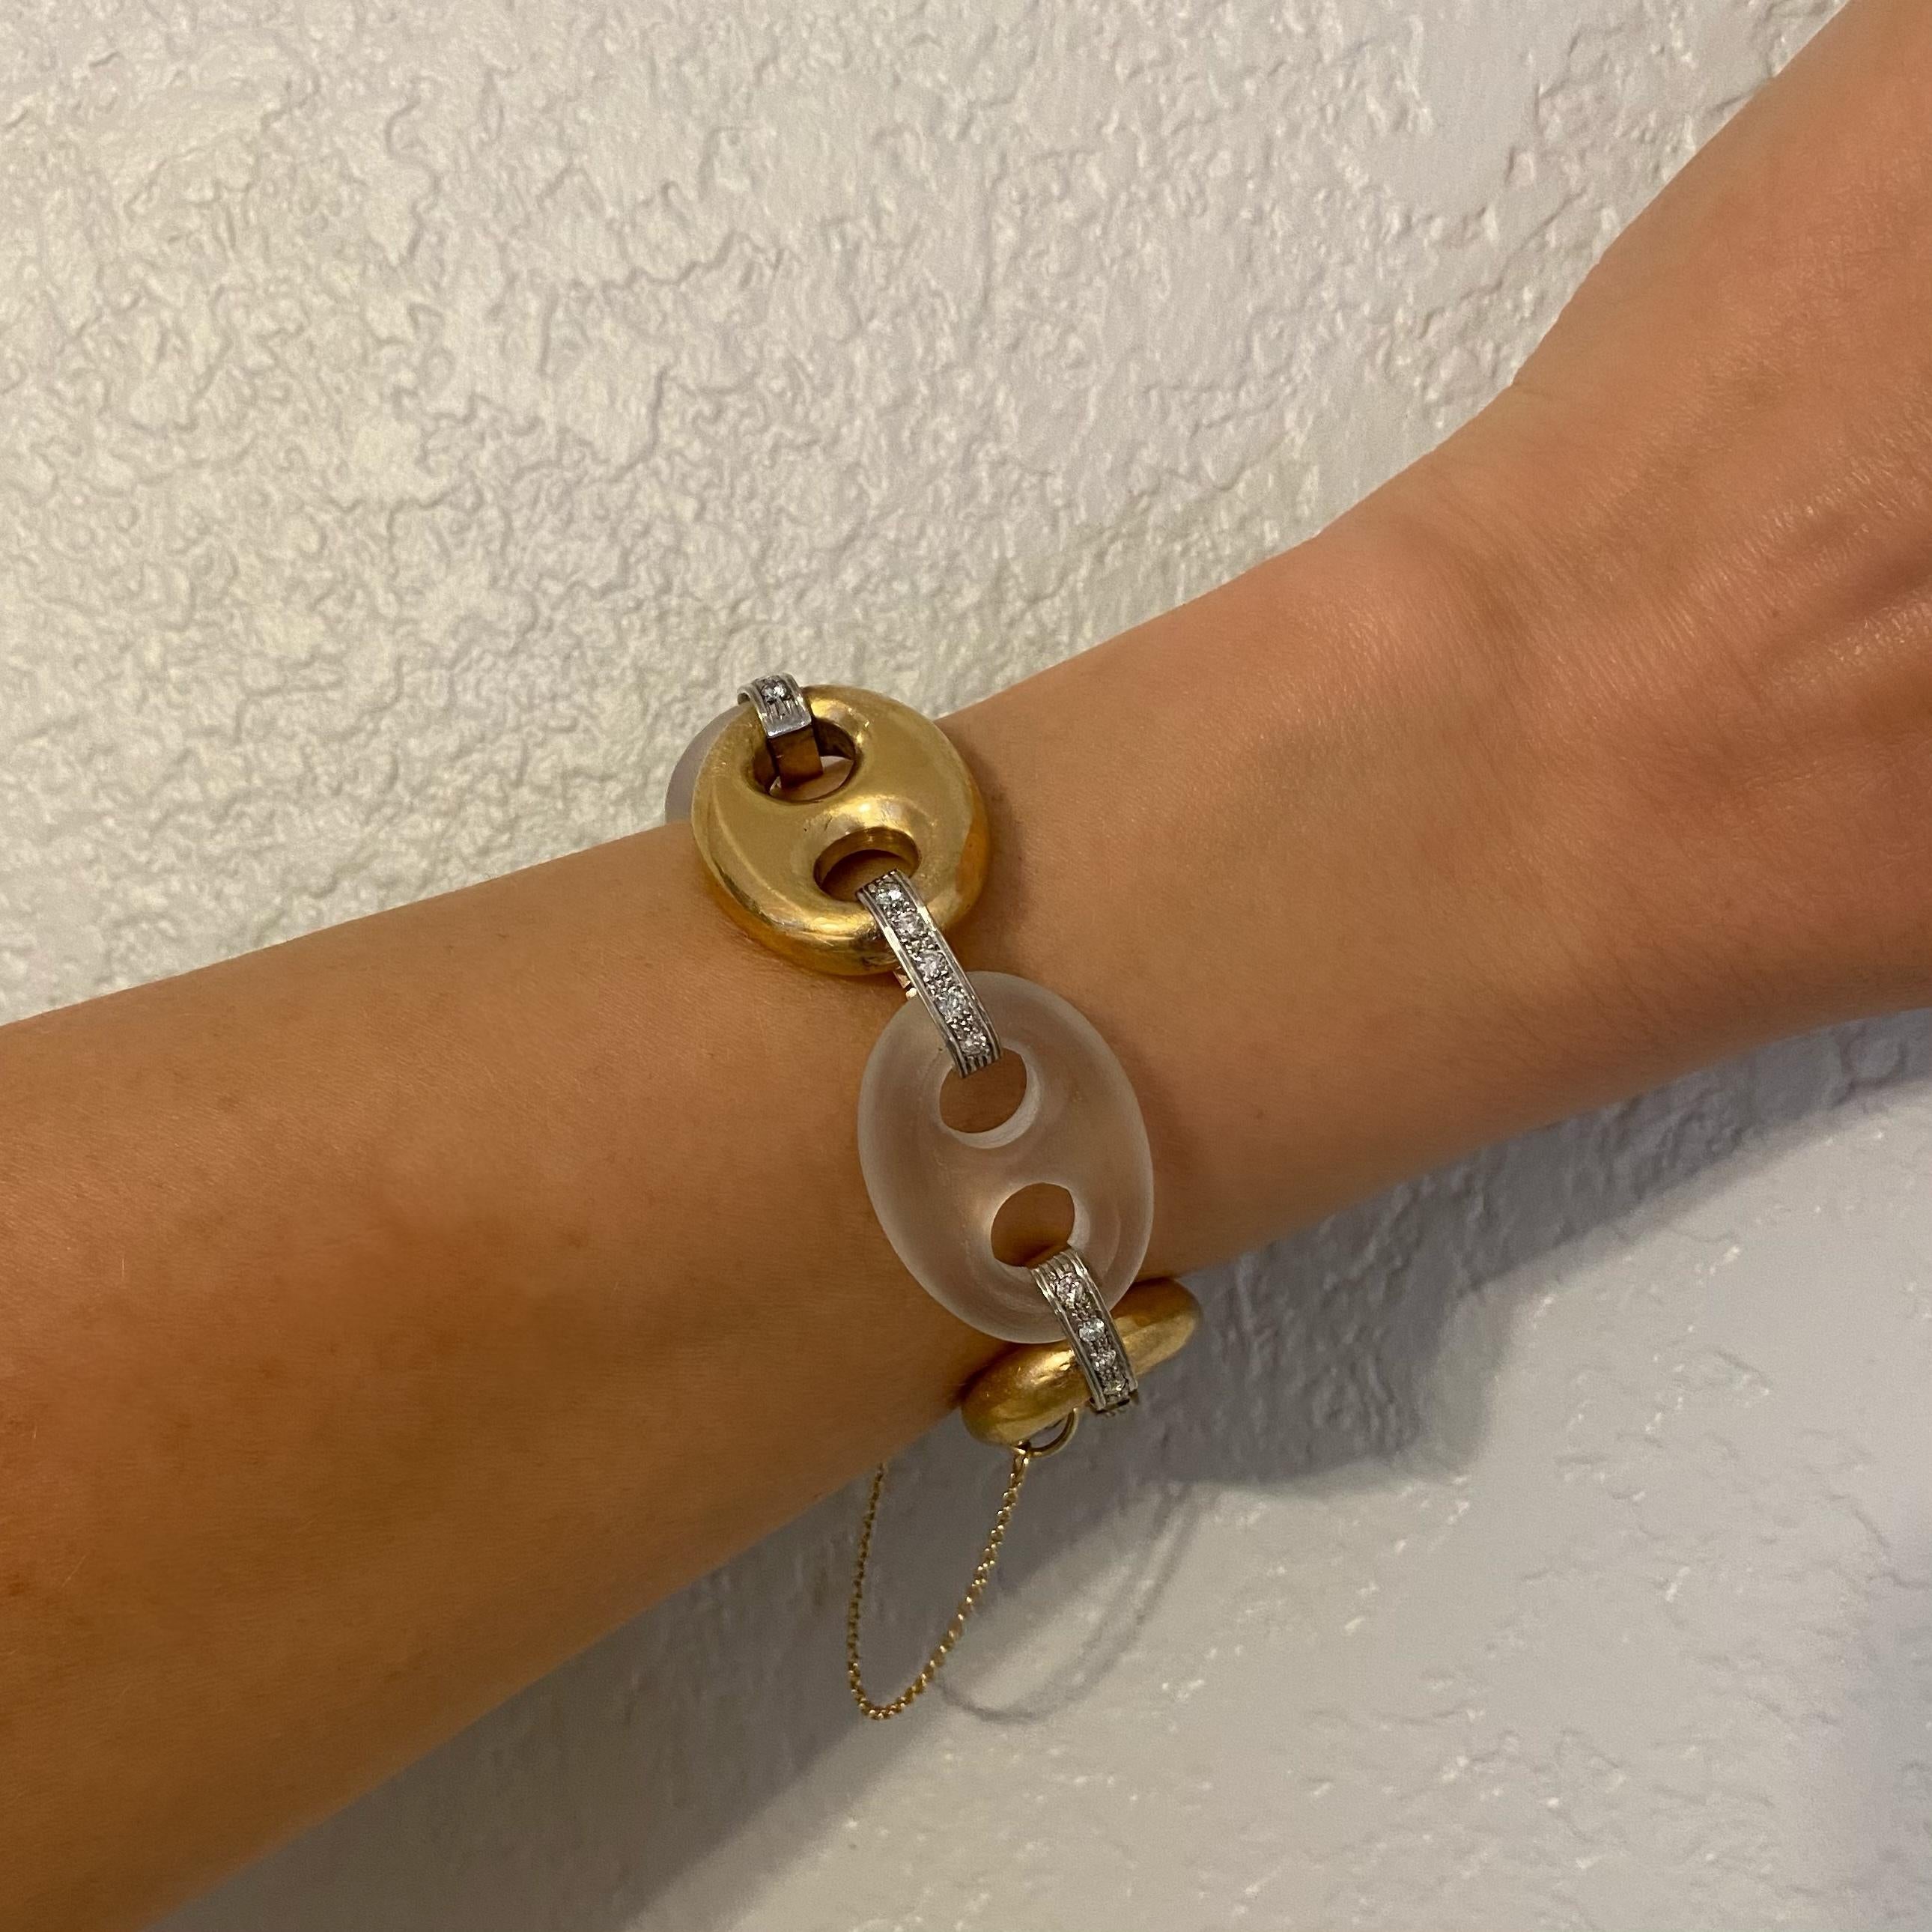 Beautiful Chunky Gold Bracelet Hand crafted with alternate Open Links in 18K Gold and Quartz Crystal with Diamond spacers set with 30 round Brilliant cut Diamonds approx. 1.50tcw. Bracelet measures approx. 7.5 long. Hand set and Hand crafted in 18K